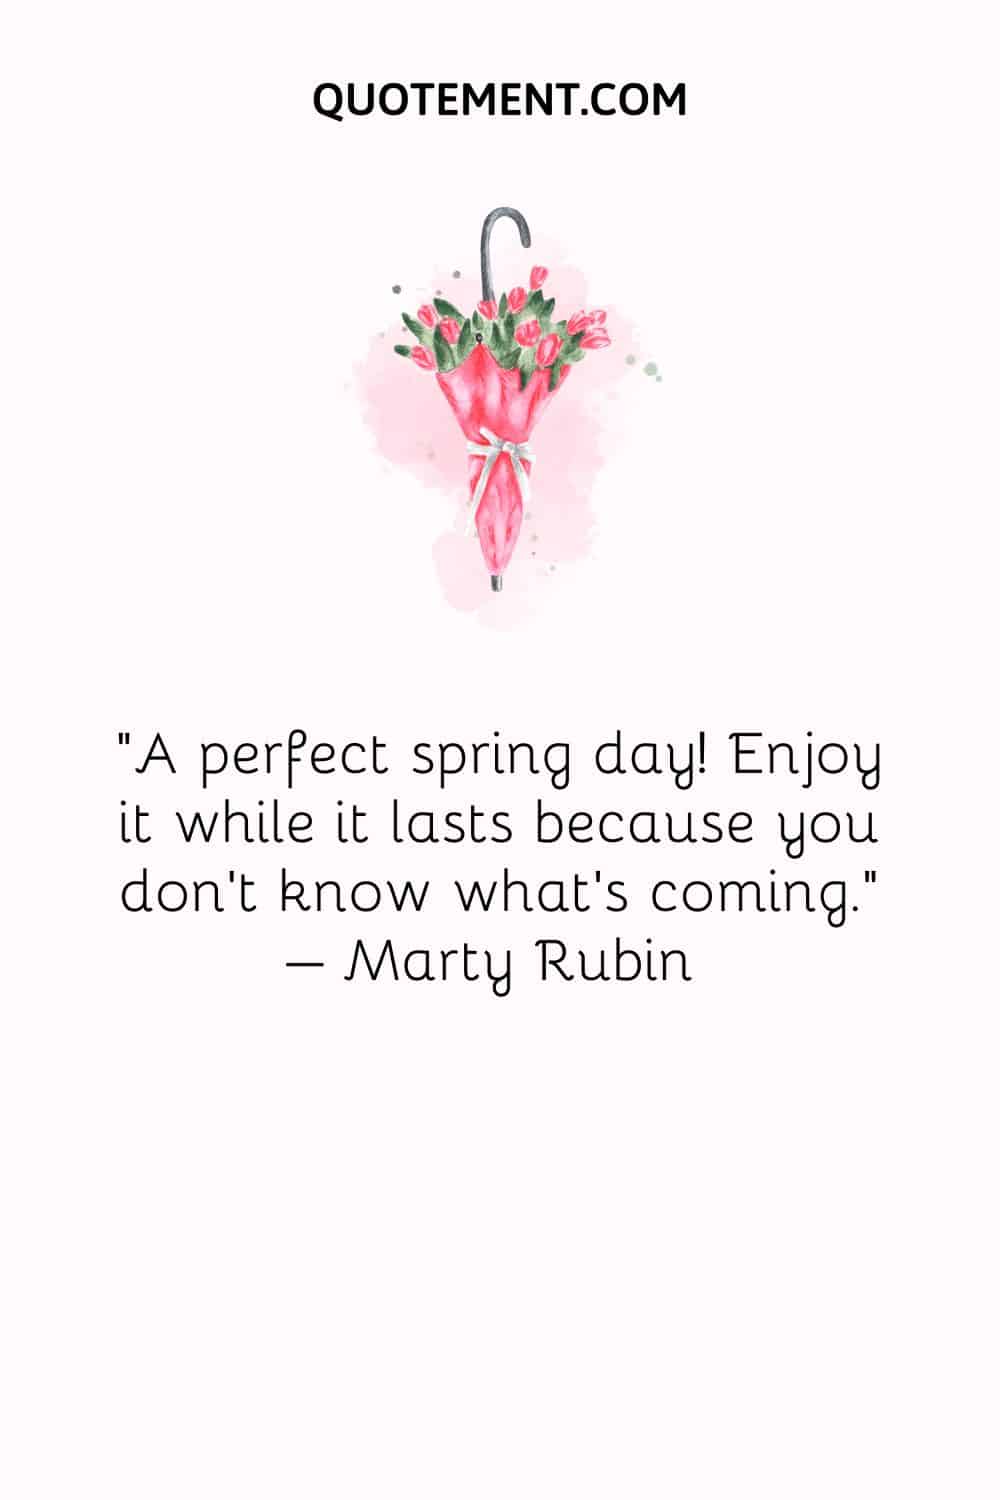 A perfect spring day! Enjoy it while it lasts because you don’t know what’s coming. – Marty Rubin